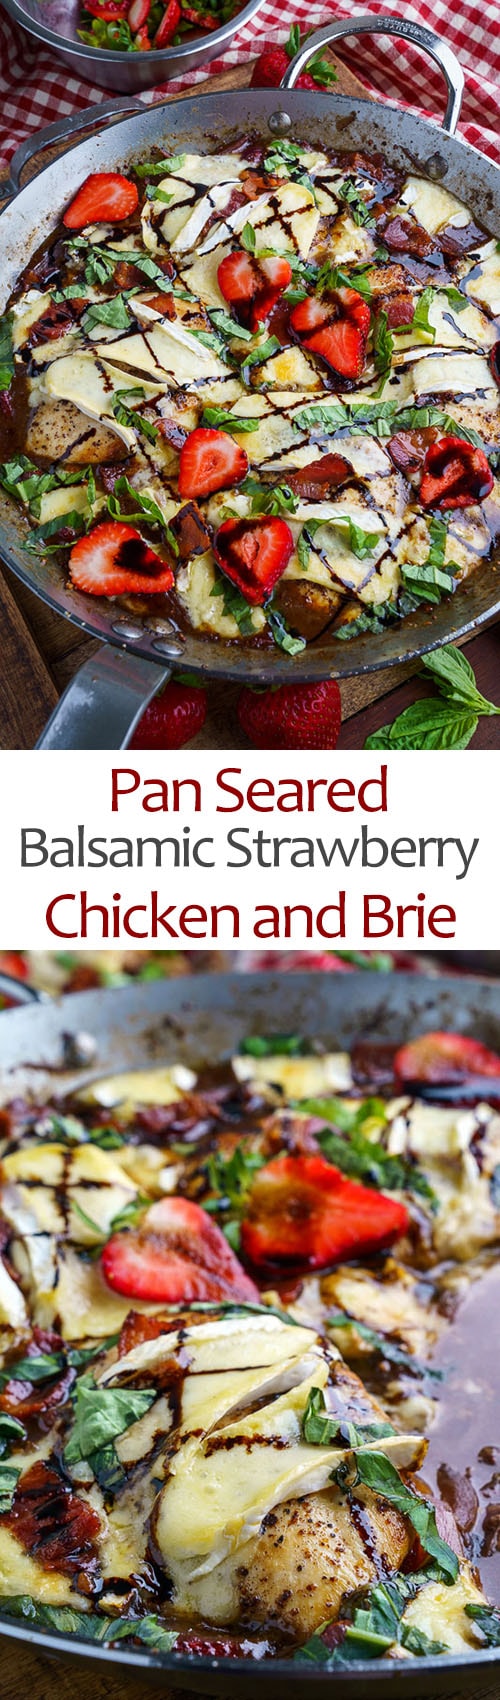 Pan Seared Balsamic Strawberry Chicken and Brie